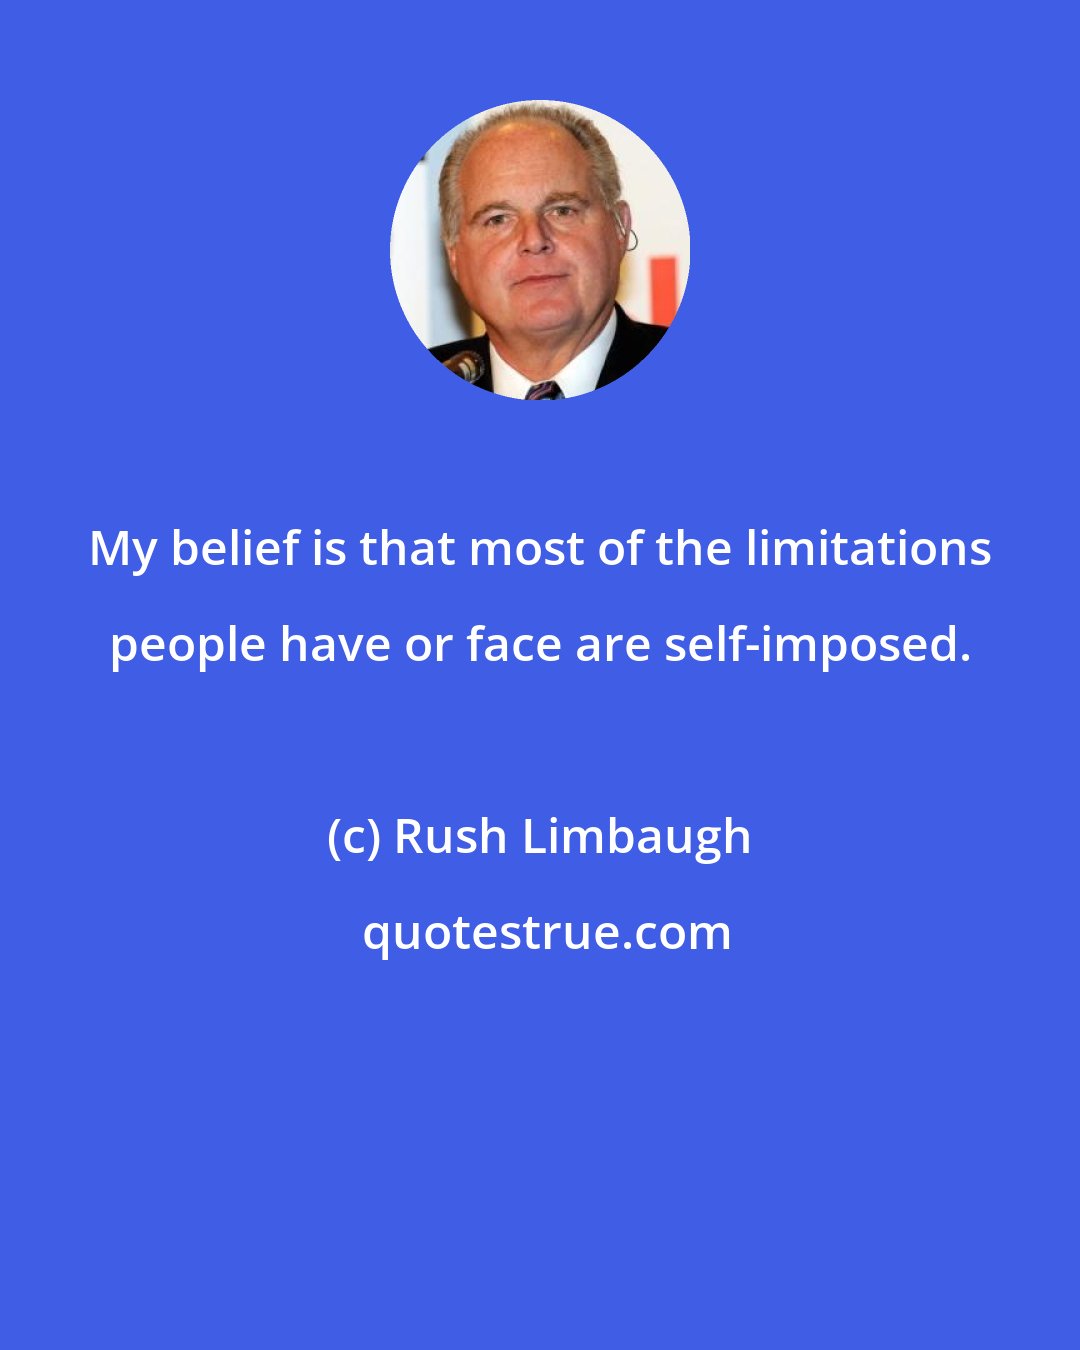 Rush Limbaugh: My belief is that most of the limitations people have or face are self-imposed.